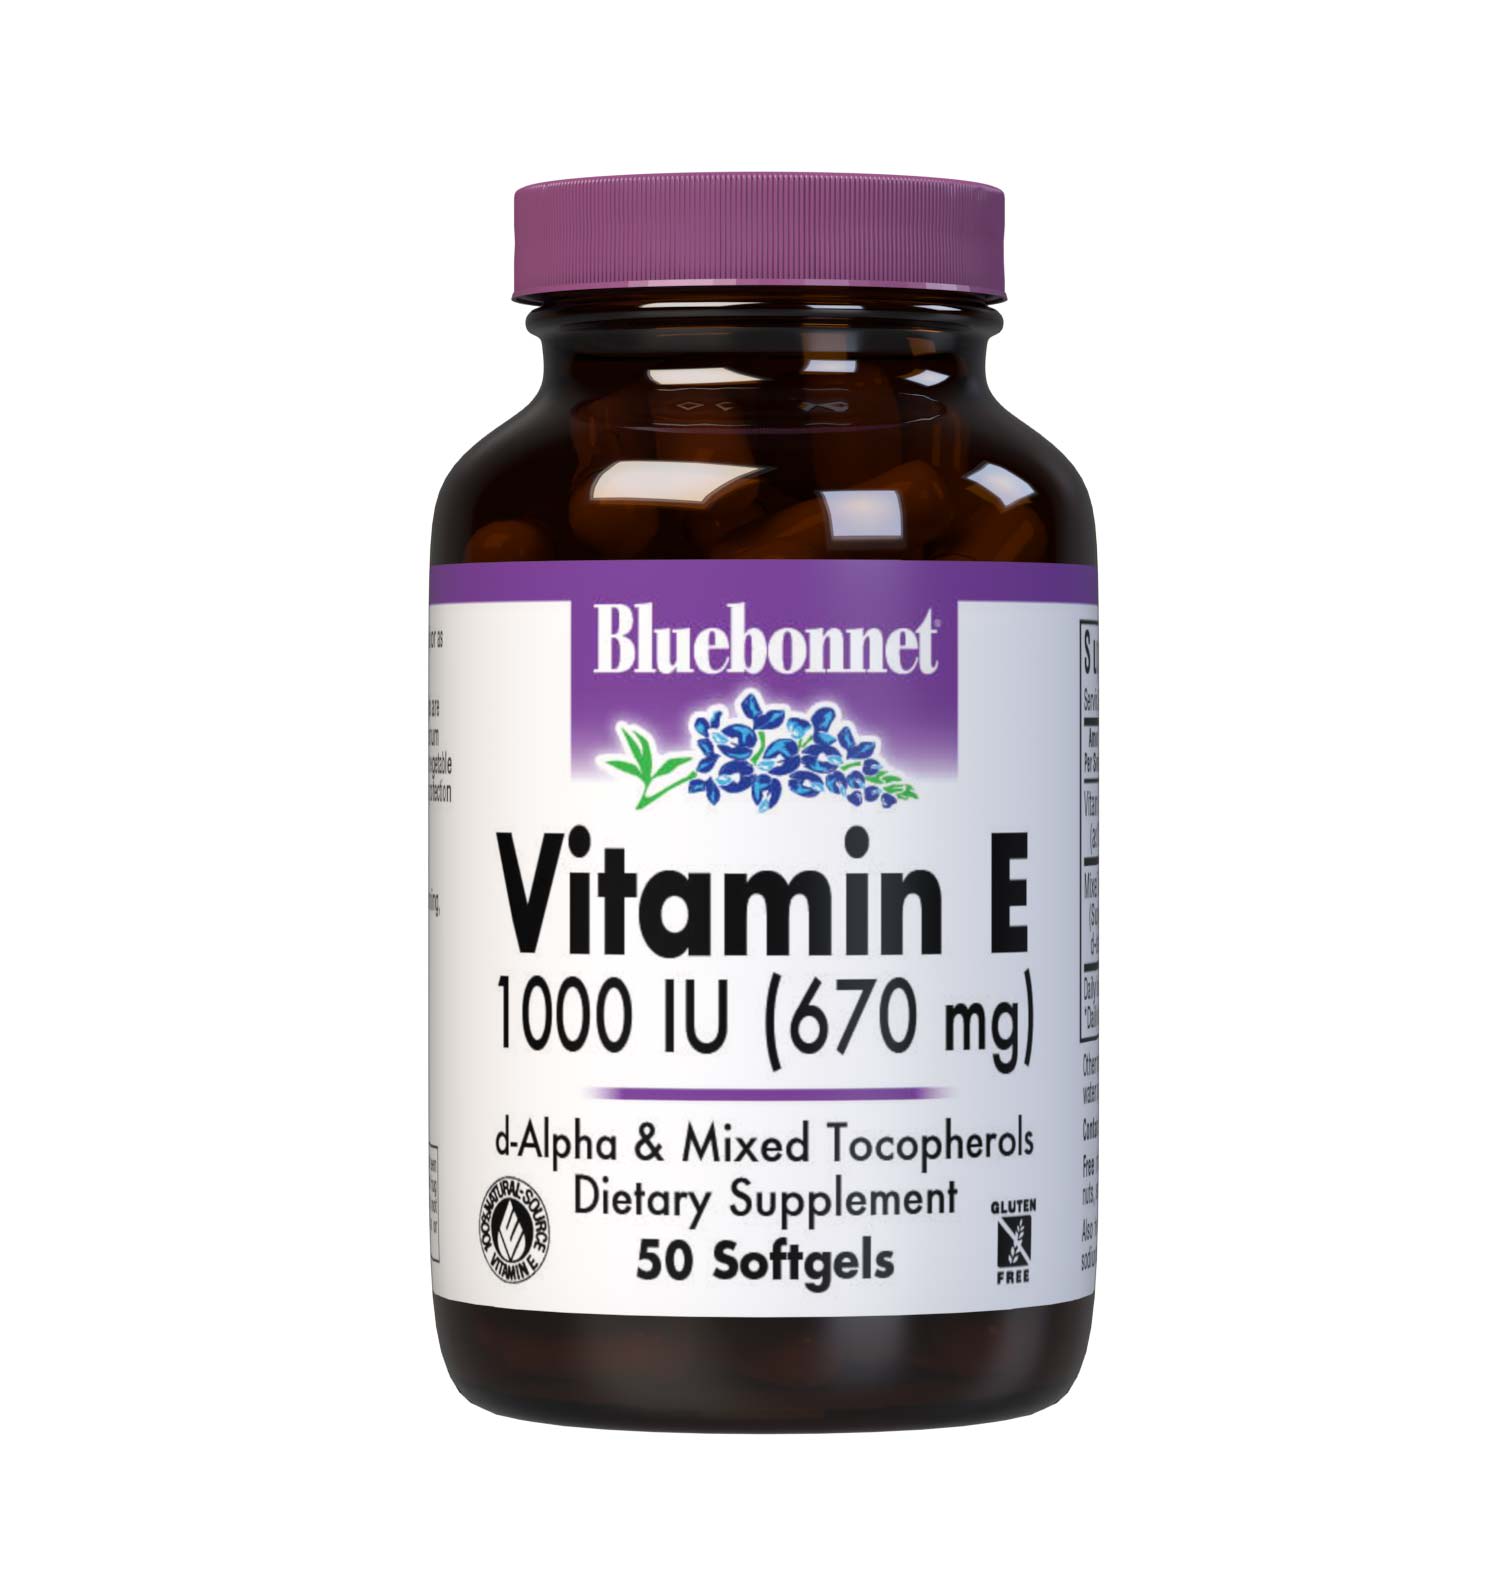 Bluebonnet’s Vitamin E 1000 lU (670 mg) Mixed Softgels are specially formulated with d-alpha tocopherol and full spectrum tocopherol isomers (beta, delta and gamma) in a base of vegetable oil. Vitamin E is an antioxidant that provides free radical protection as well as cardiovascular support. #size_50 count